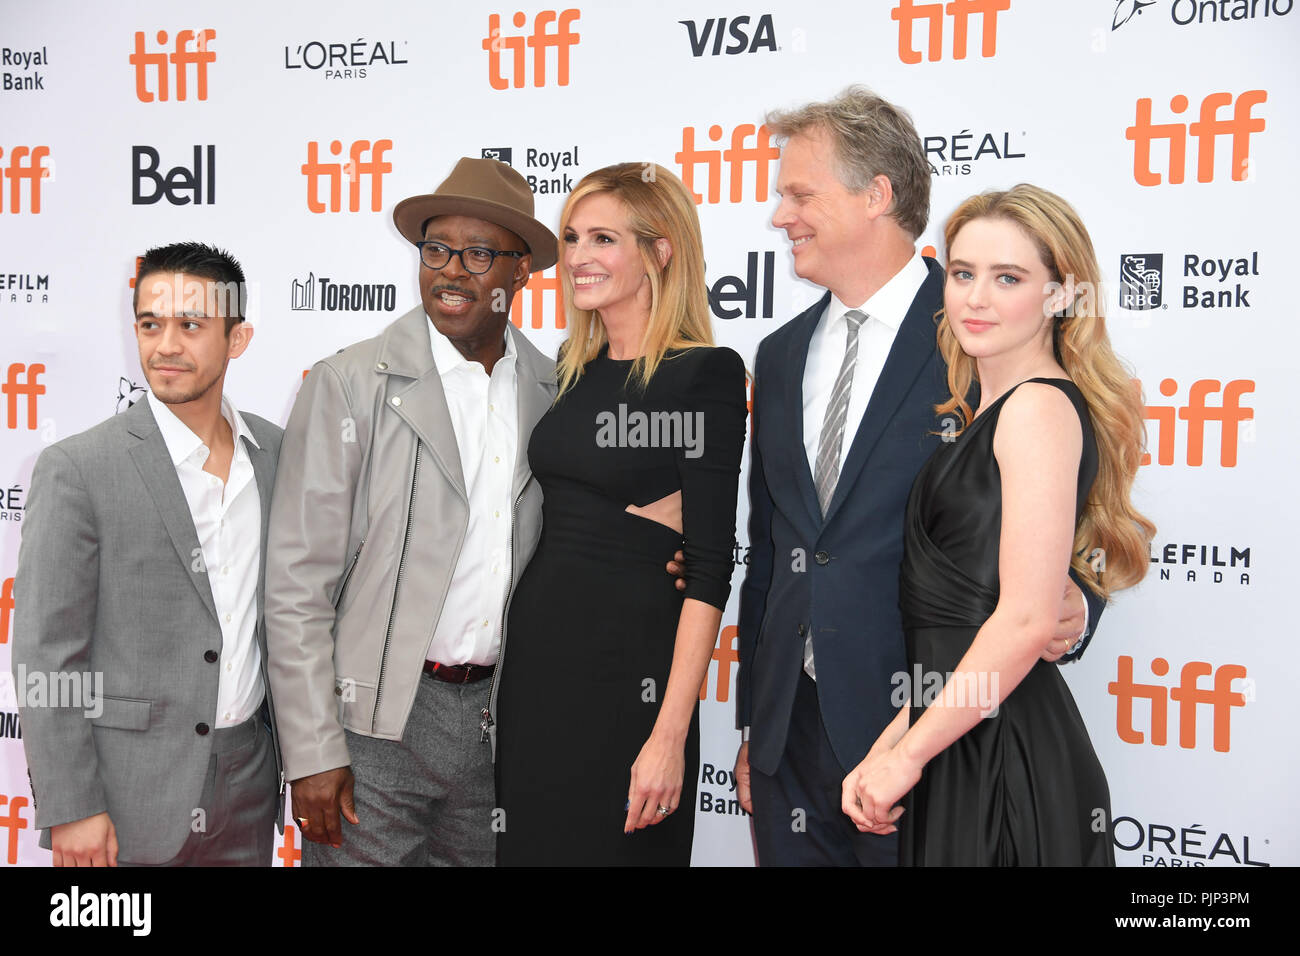 Toronto, Ontario, Canada. 8th Sep, 2018. DAVID ZALDIVAR, COURTNEY B. VANCE, JULIA ROBERTS, PETER HEDGES and KATHRYN NEWTON attend 'Ben Is Back' premiere during the 2018 Toronto International Film Festival at Princess of Wales Theatre on September 08, 2018 in Toronto, Canada Credit: Igor Vidyashev/ZUMA Wire/Alamy Live News Stock Photo